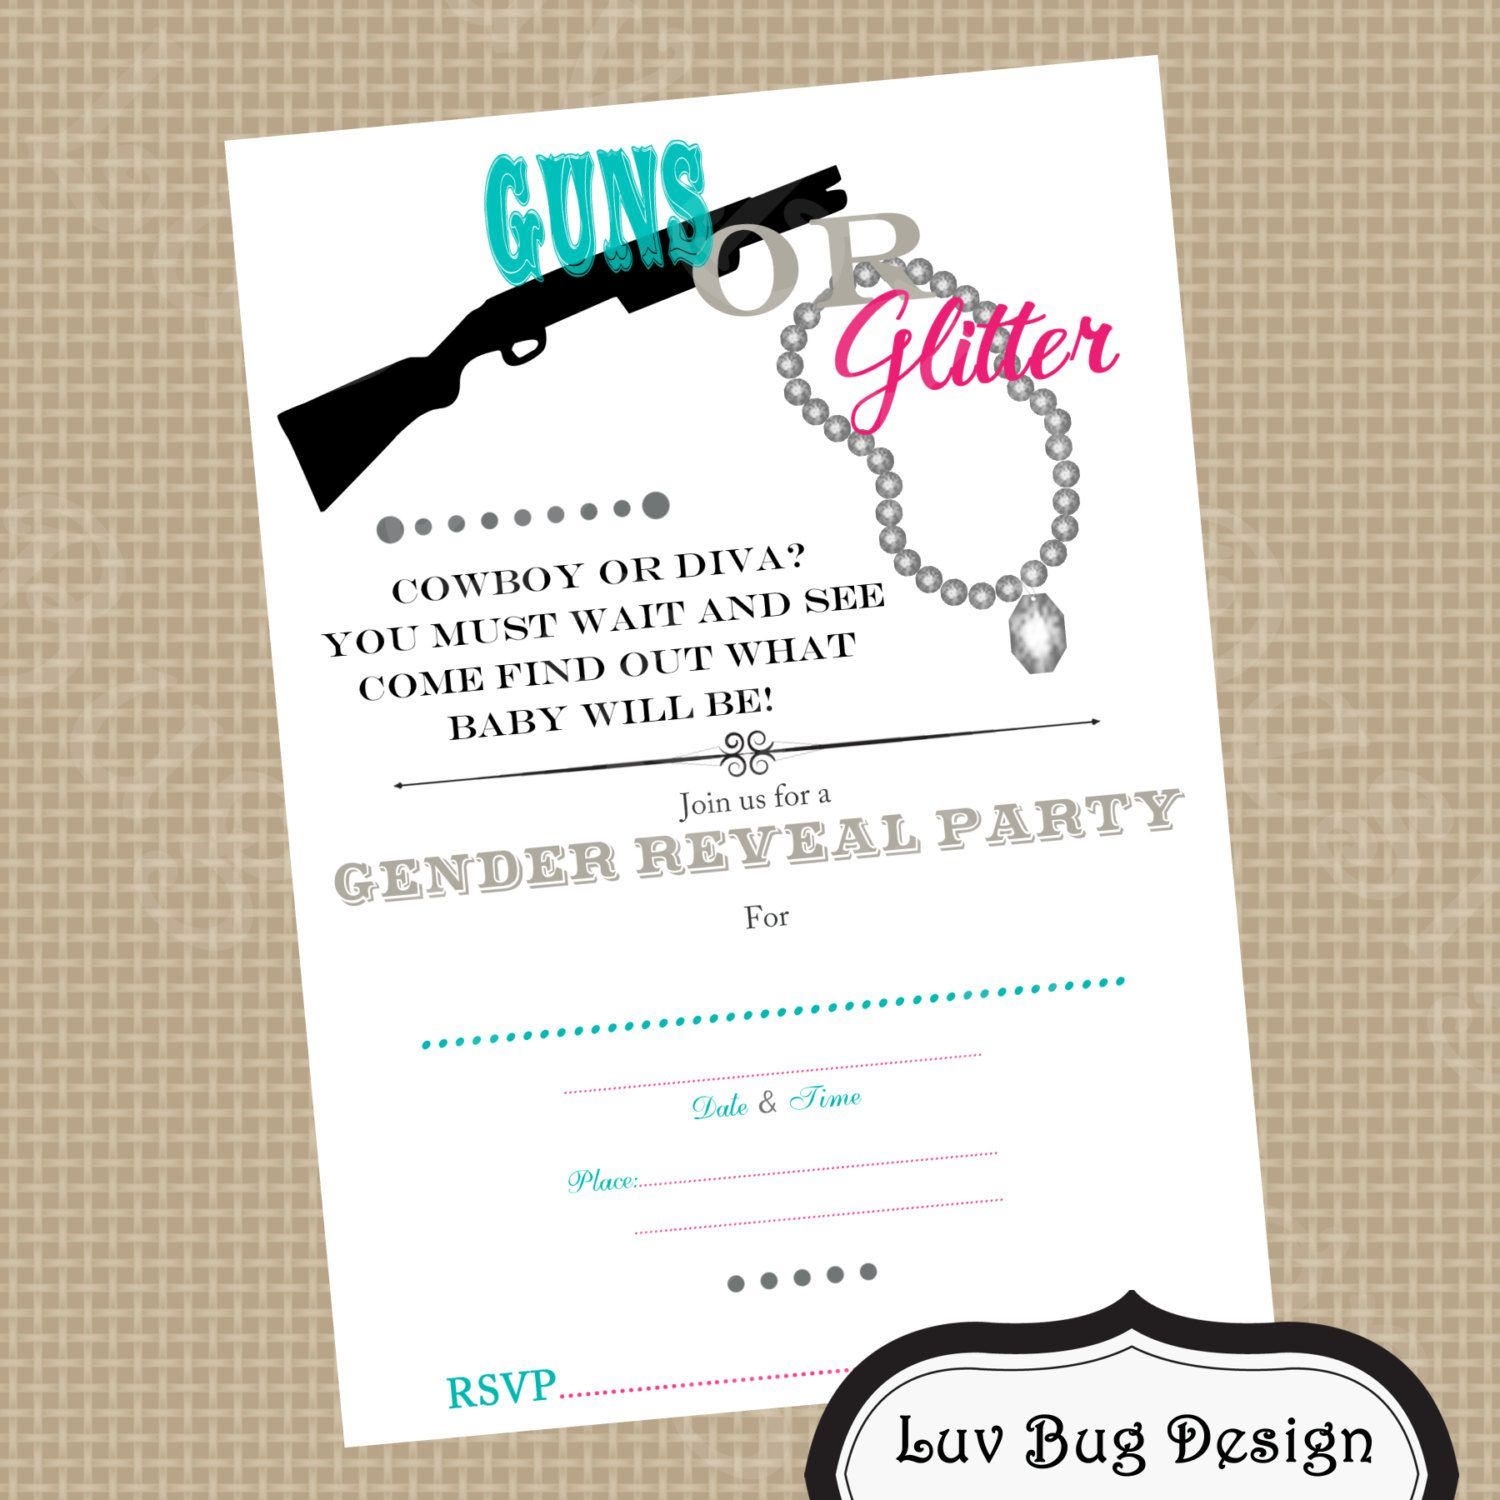 Free Gender Reveal Party Invitations - Free Printable Fresh Gender - Free Printable Gender Reveal Templates